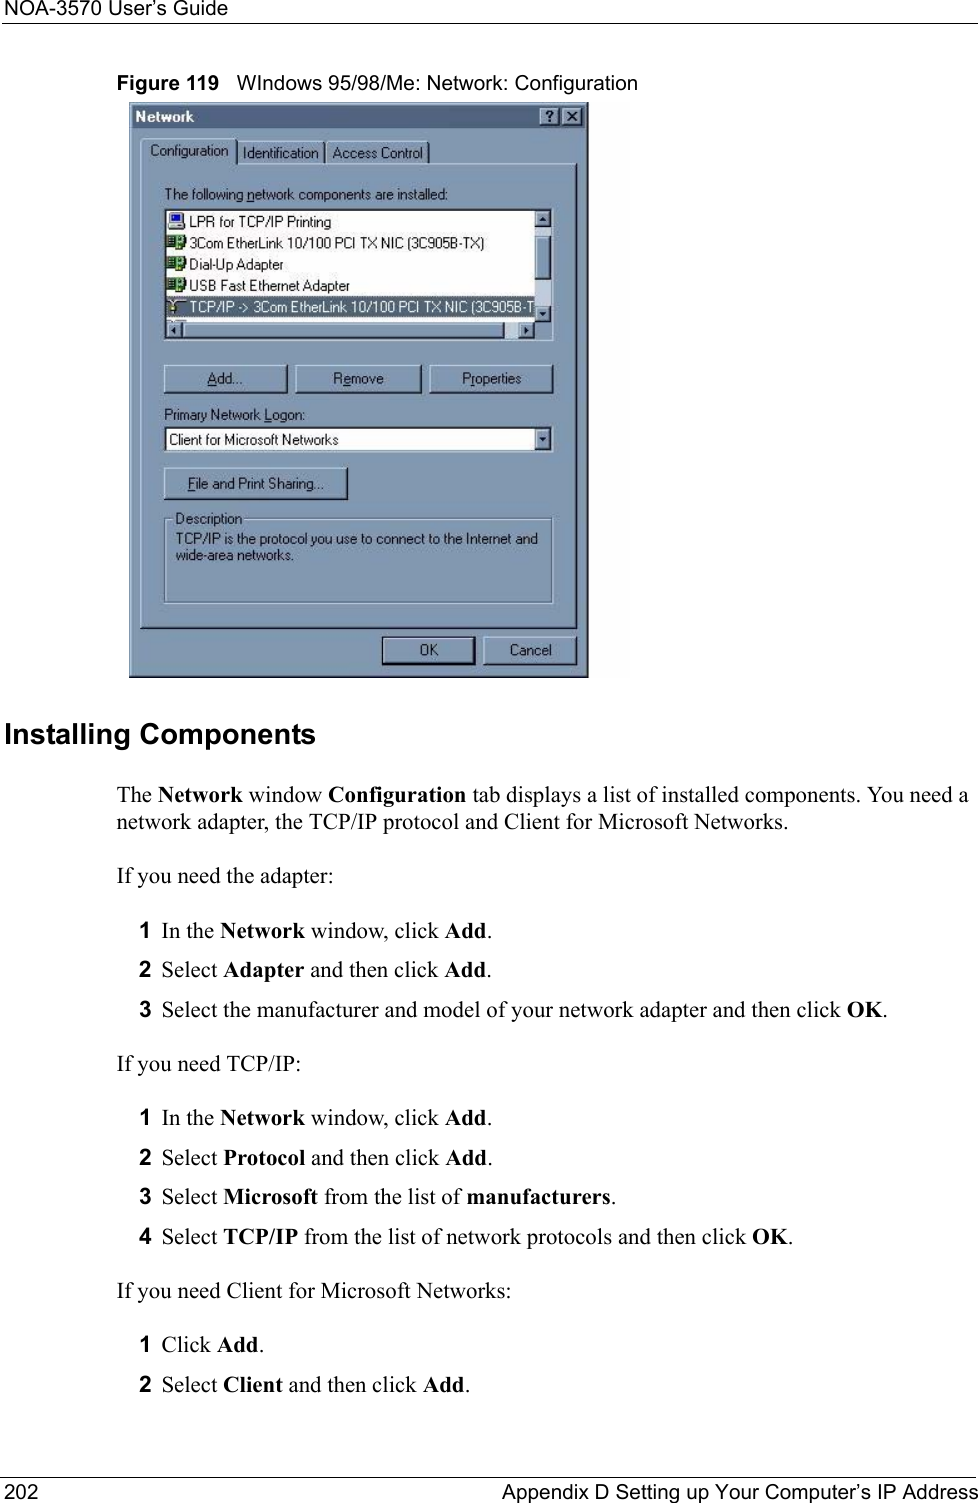 NOA-3570 User’s Guide202 Appendix D Setting up Your Computer’s IP AddressFigure 119   WIndows 95/98/Me: Network: ConfigurationInstalling ComponentsThe Network window Configuration tab displays a list of installed components. You need a network adapter, the TCP/IP protocol and Client for Microsoft Networks.If you need the adapter:1In the Network window, click Add.2Select Adapter and then click Add.3Select the manufacturer and model of your network adapter and then click OK.If you need TCP/IP:1In the Network window, click Add.2Select Protocol and then click Add.3Select Microsoft from the list of manufacturers.4Select TCP/IP from the list of network protocols and then click OK.If you need Client for Microsoft Networks:1Click Add.2Select Client and then click Add.